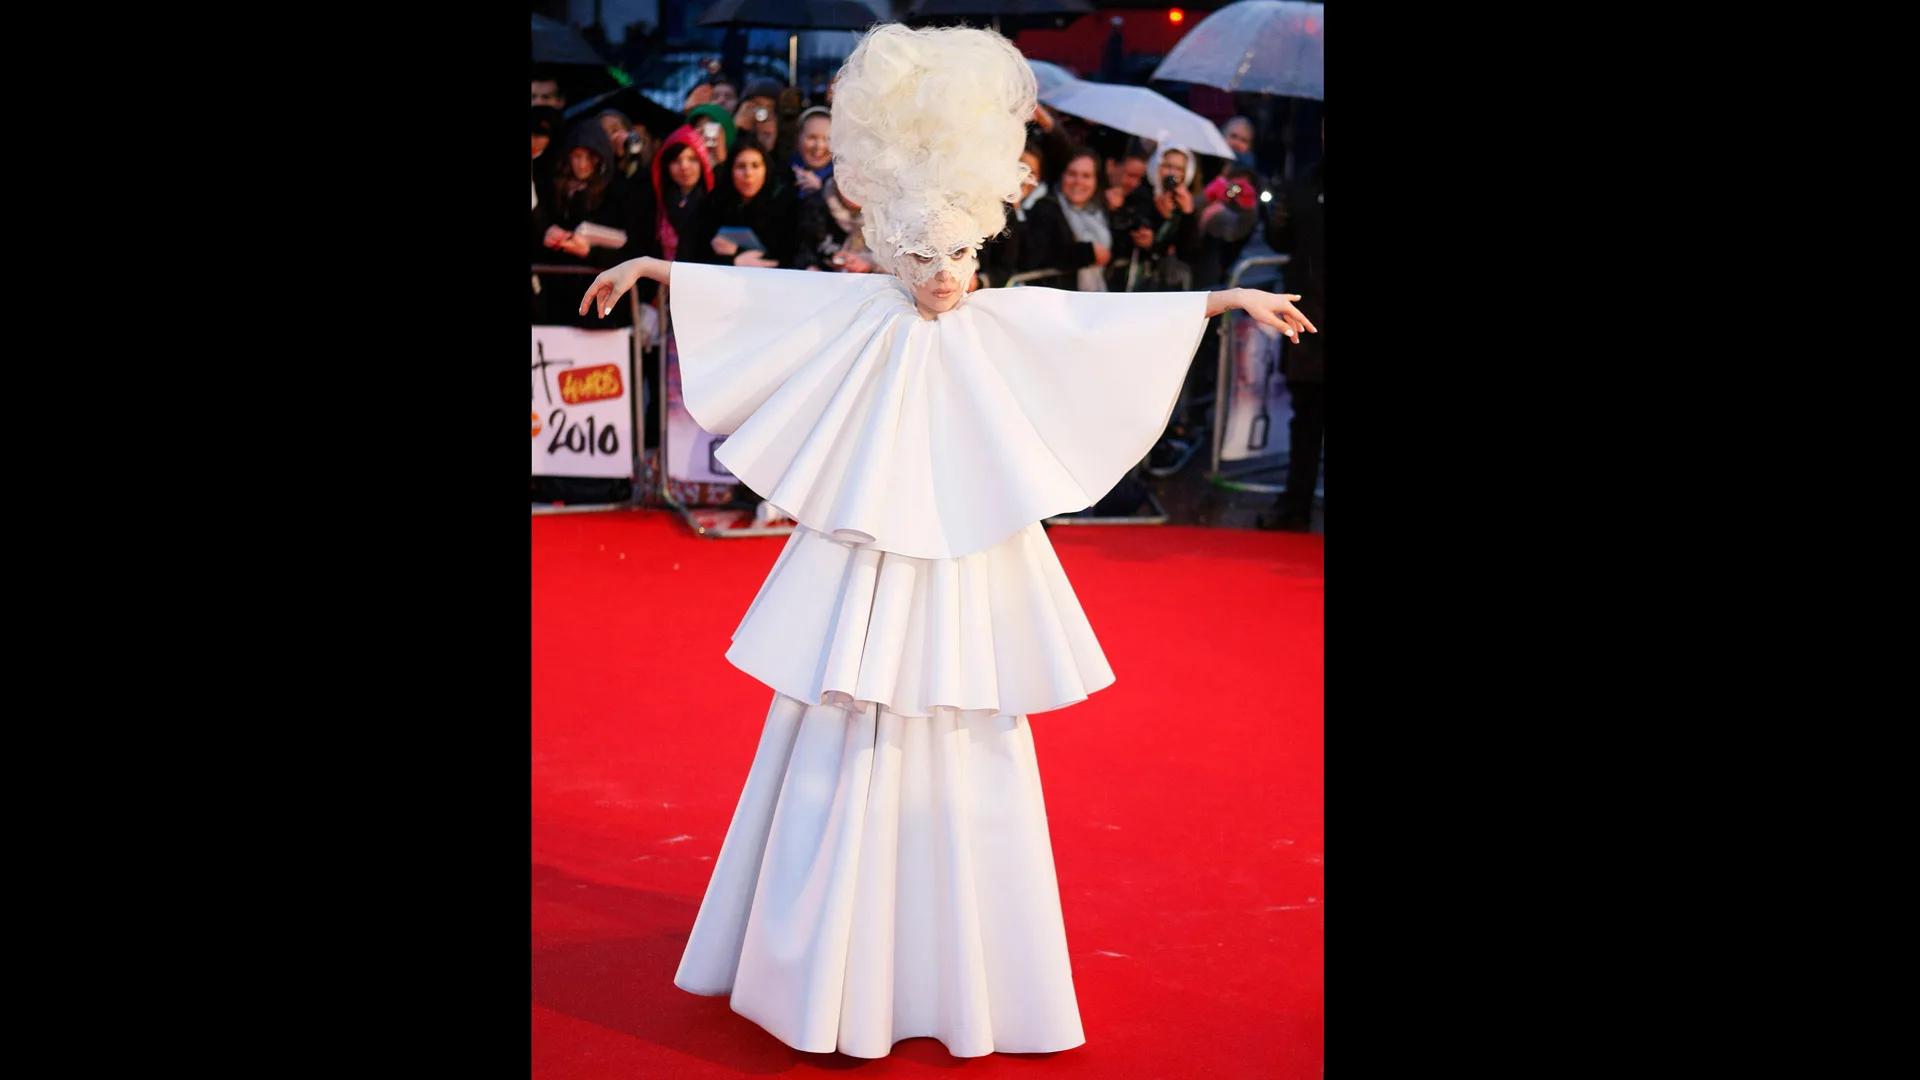 Photograph of Lady Gaga in a white outfit on the red carpet at the Brit Awards